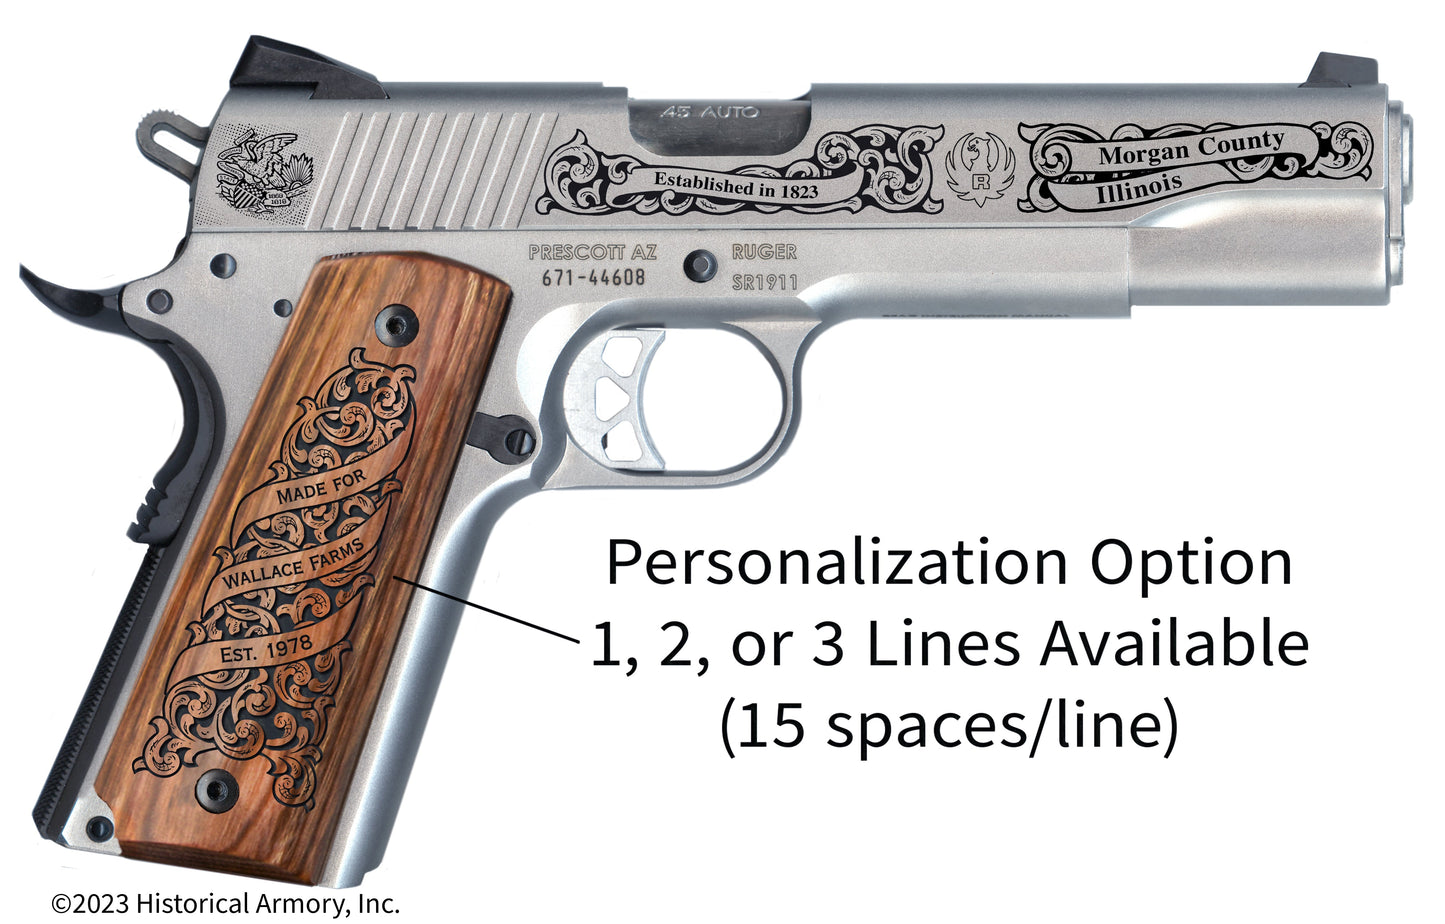 Morgan County Illinois Personalized Engraved .45 Auto Ruger 1911